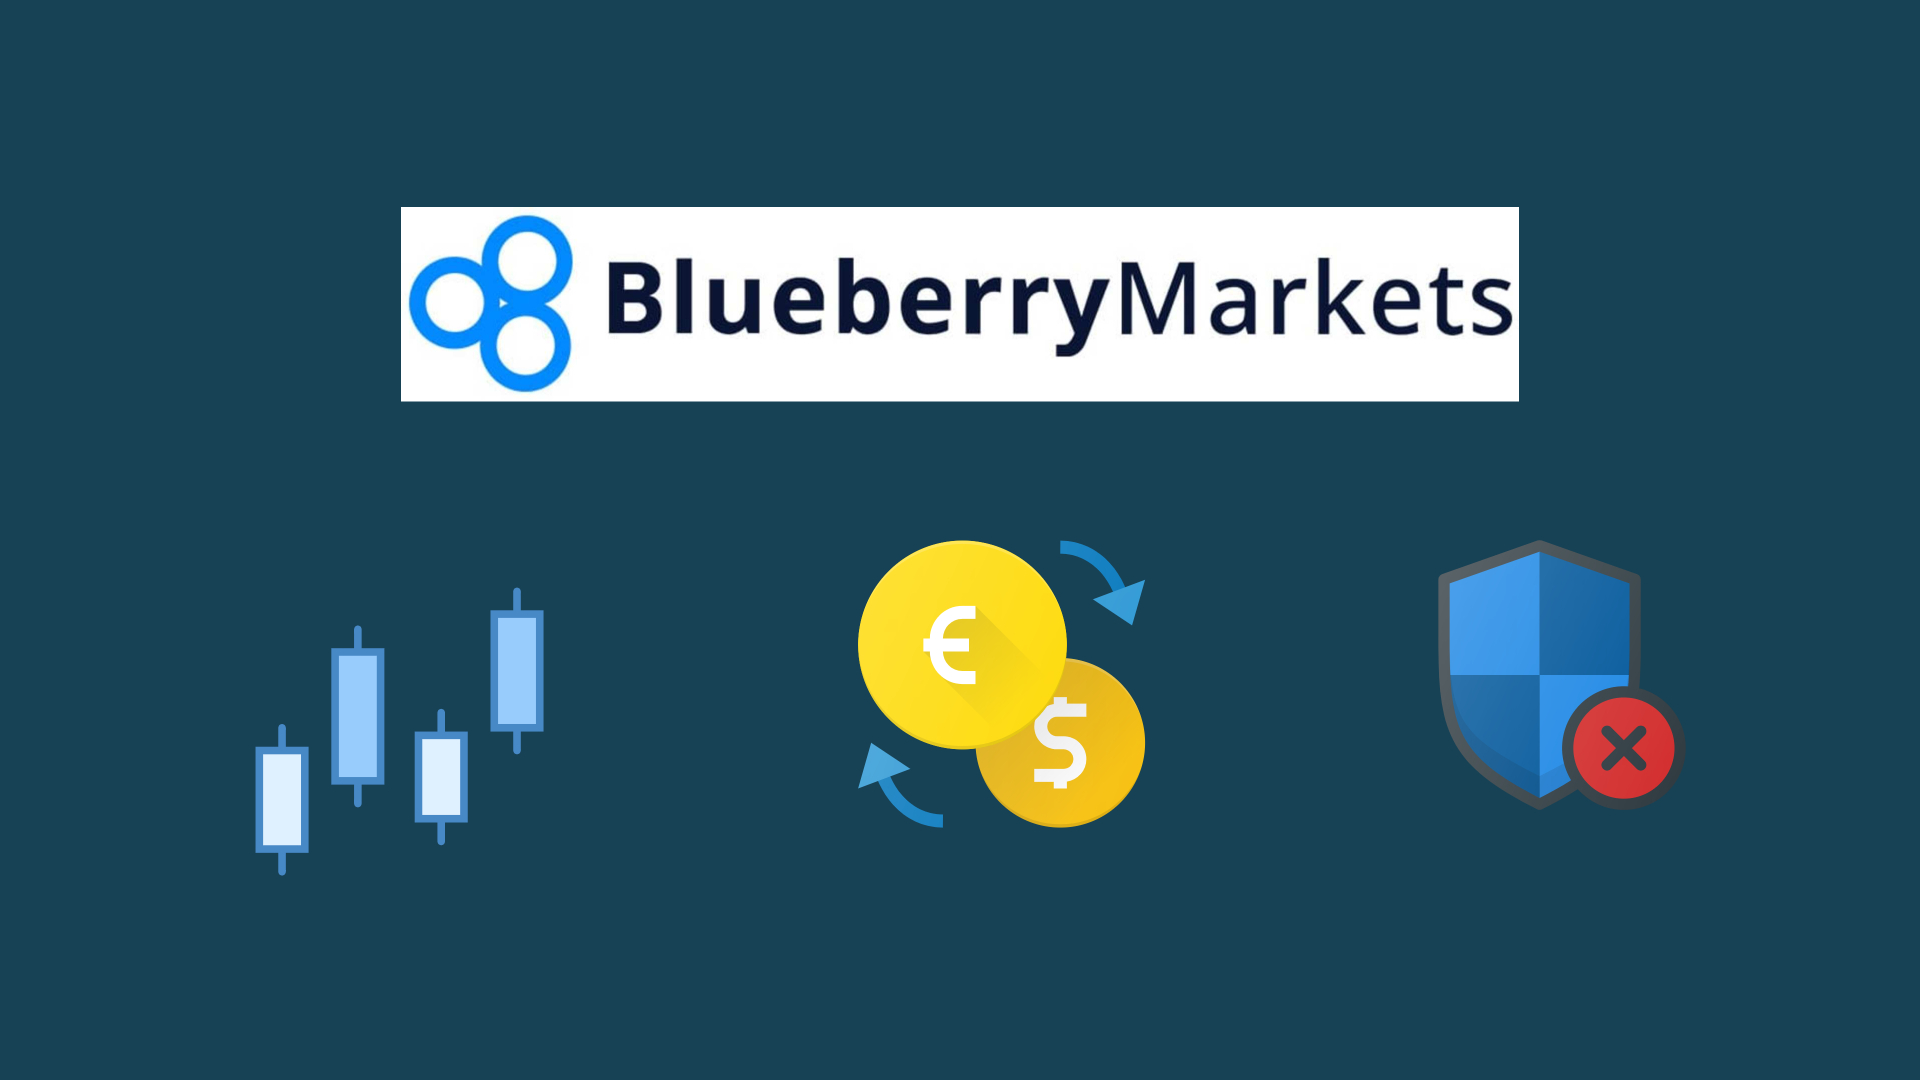 Blueberry Markets review – should you trust it?